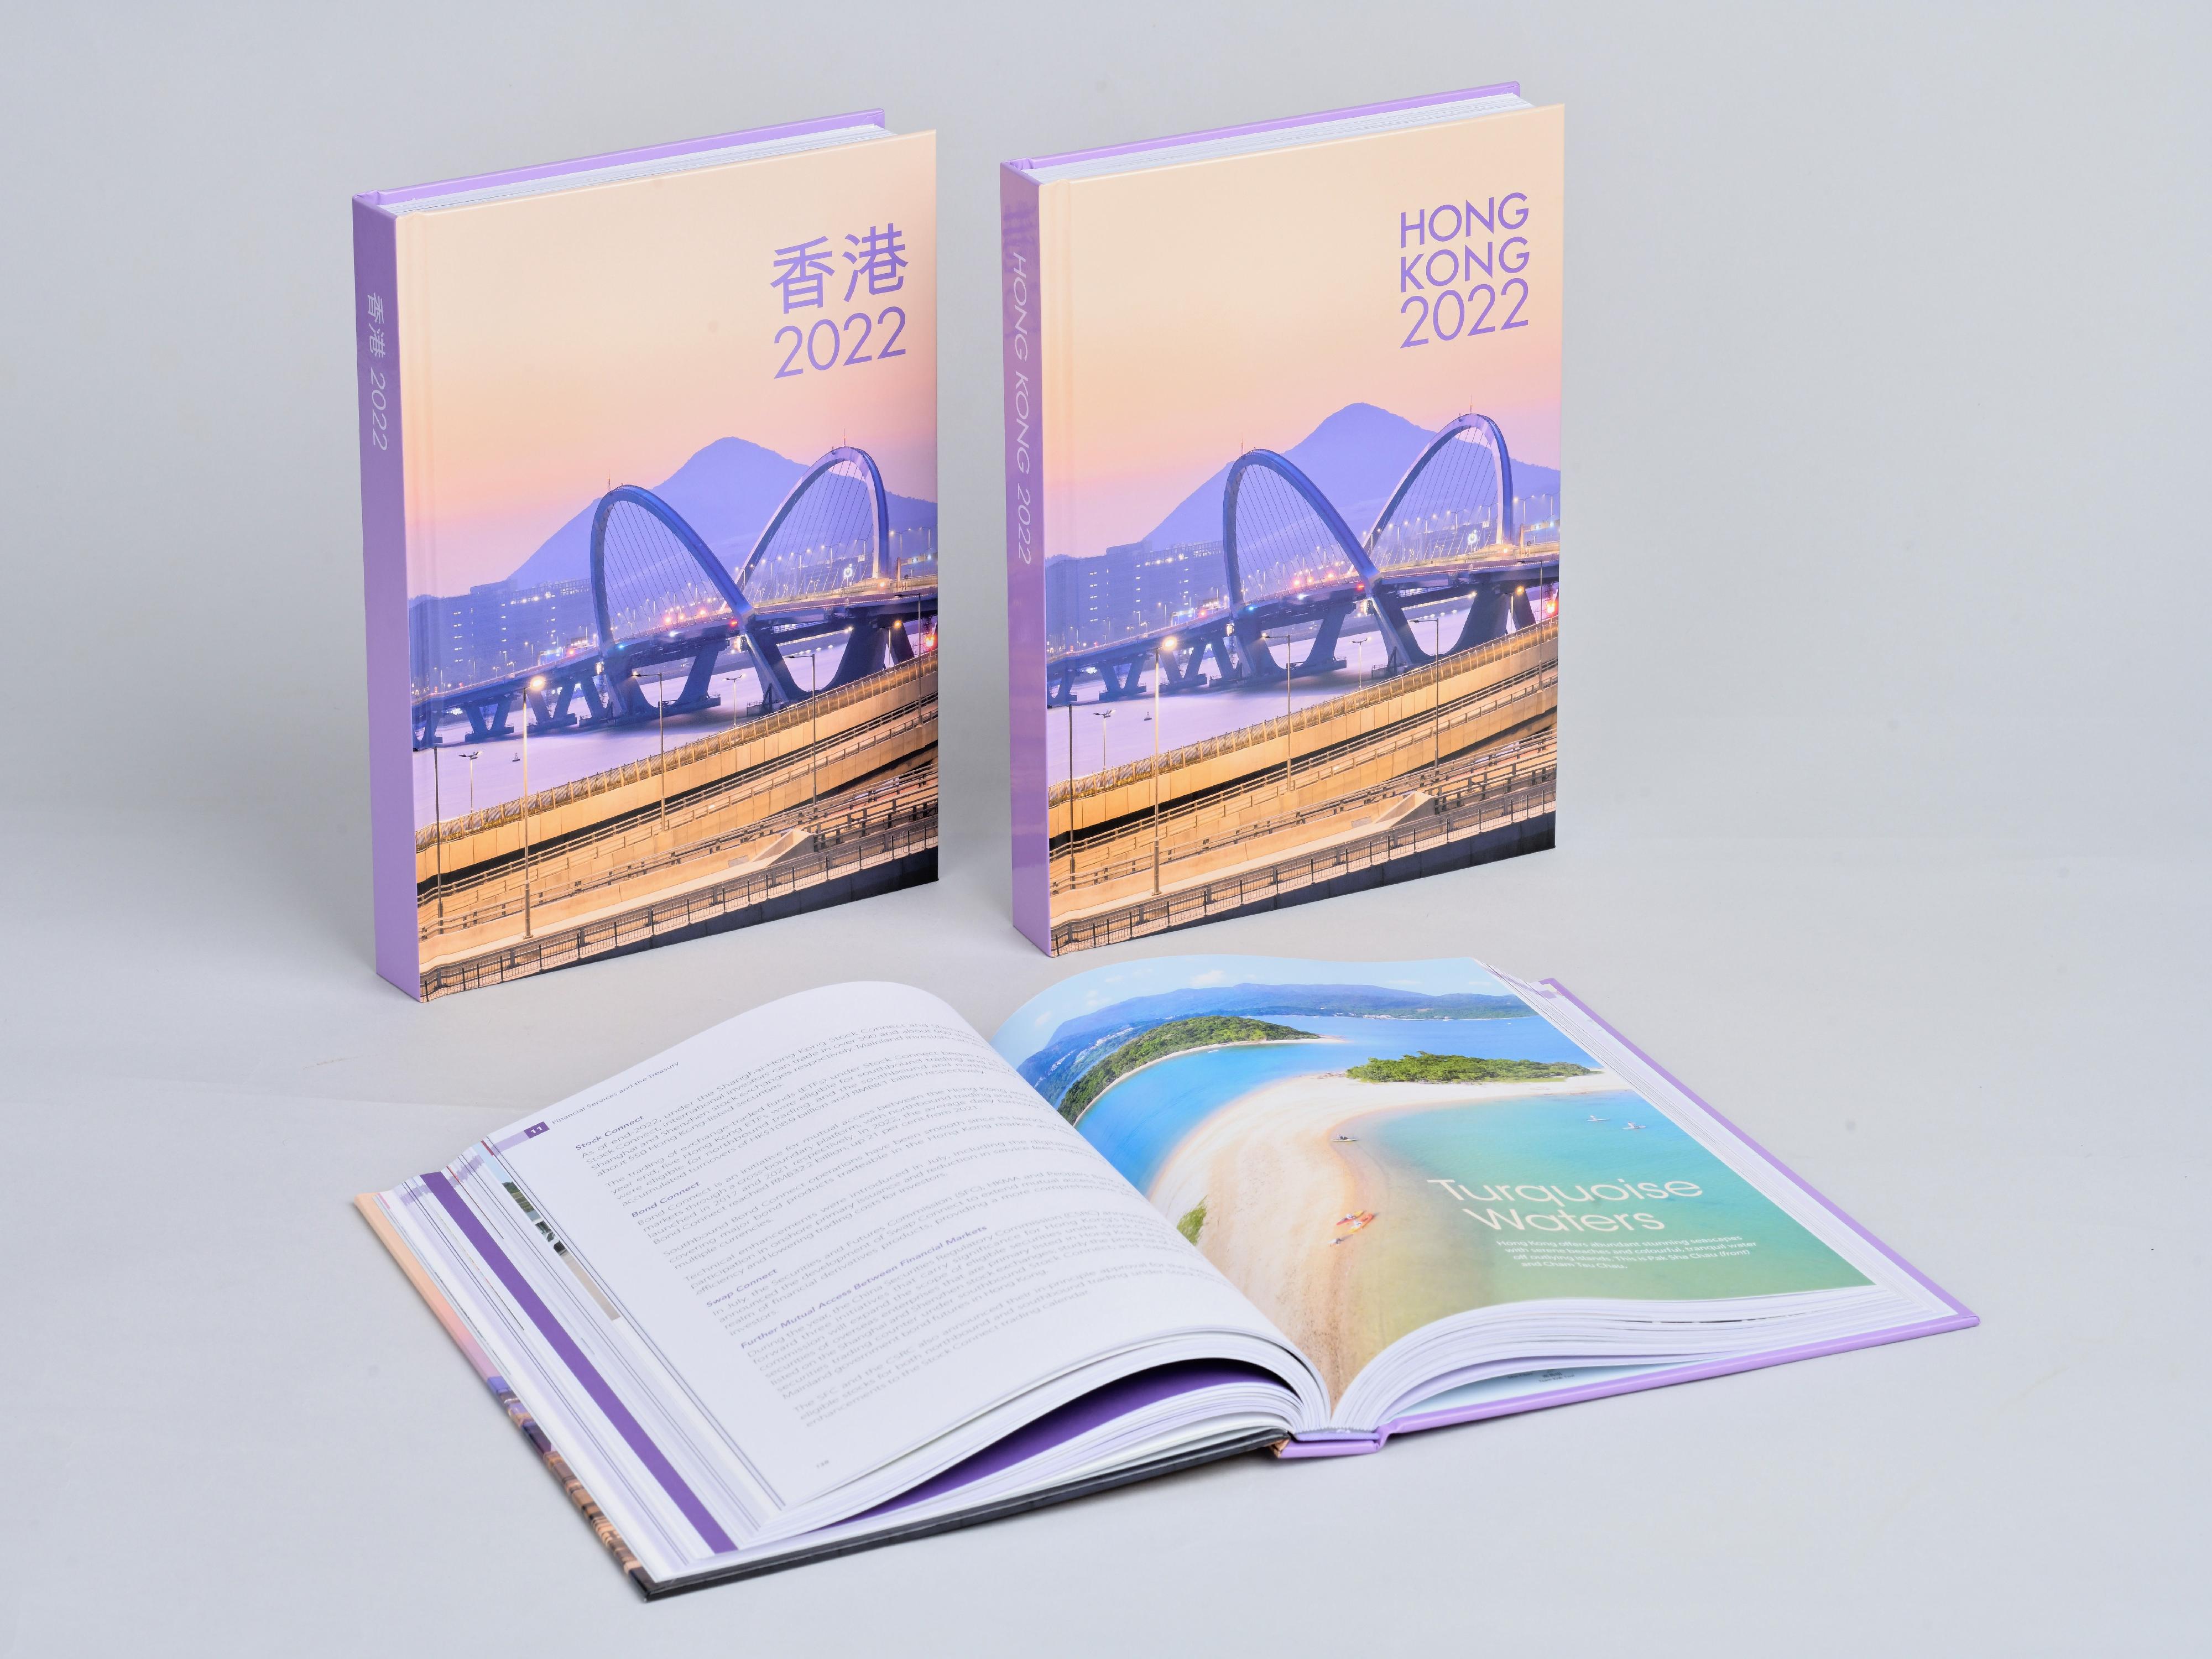 The Government's latest yearbook, "Hong Kong 2022", goes on sale today (November 17).